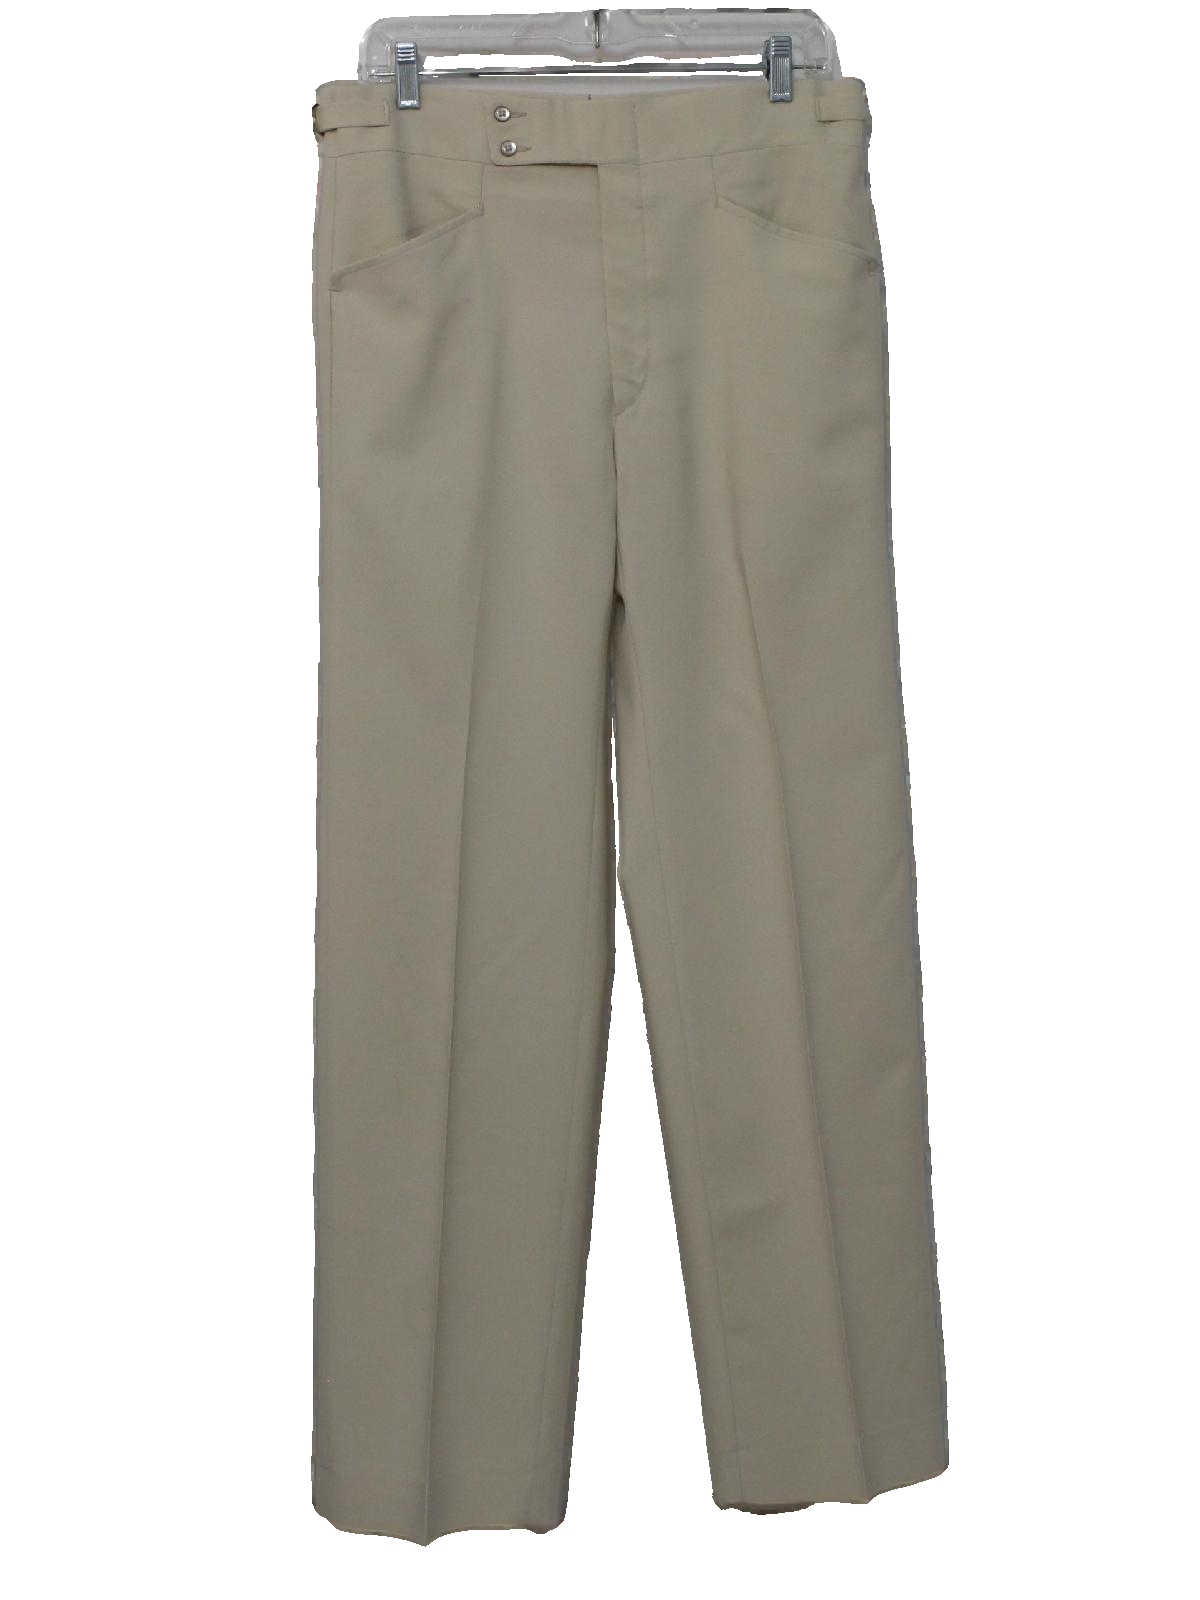 1980's Pants: Early 80s -No Label- Mens beige solid colored polyester ...